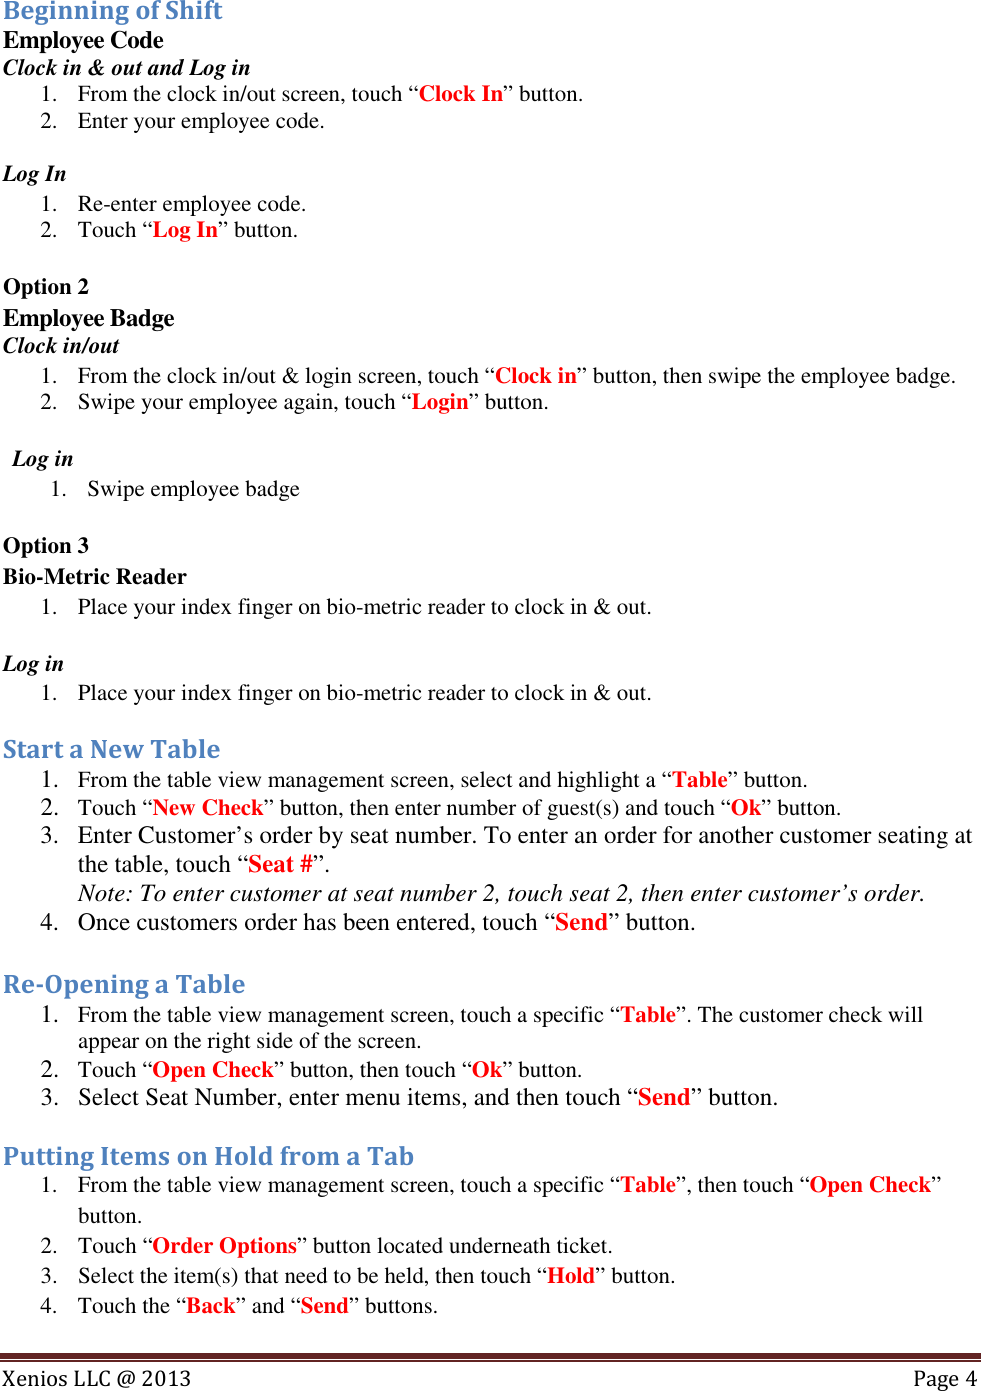 Page 4 of 8 - Table Management Quick Reference X